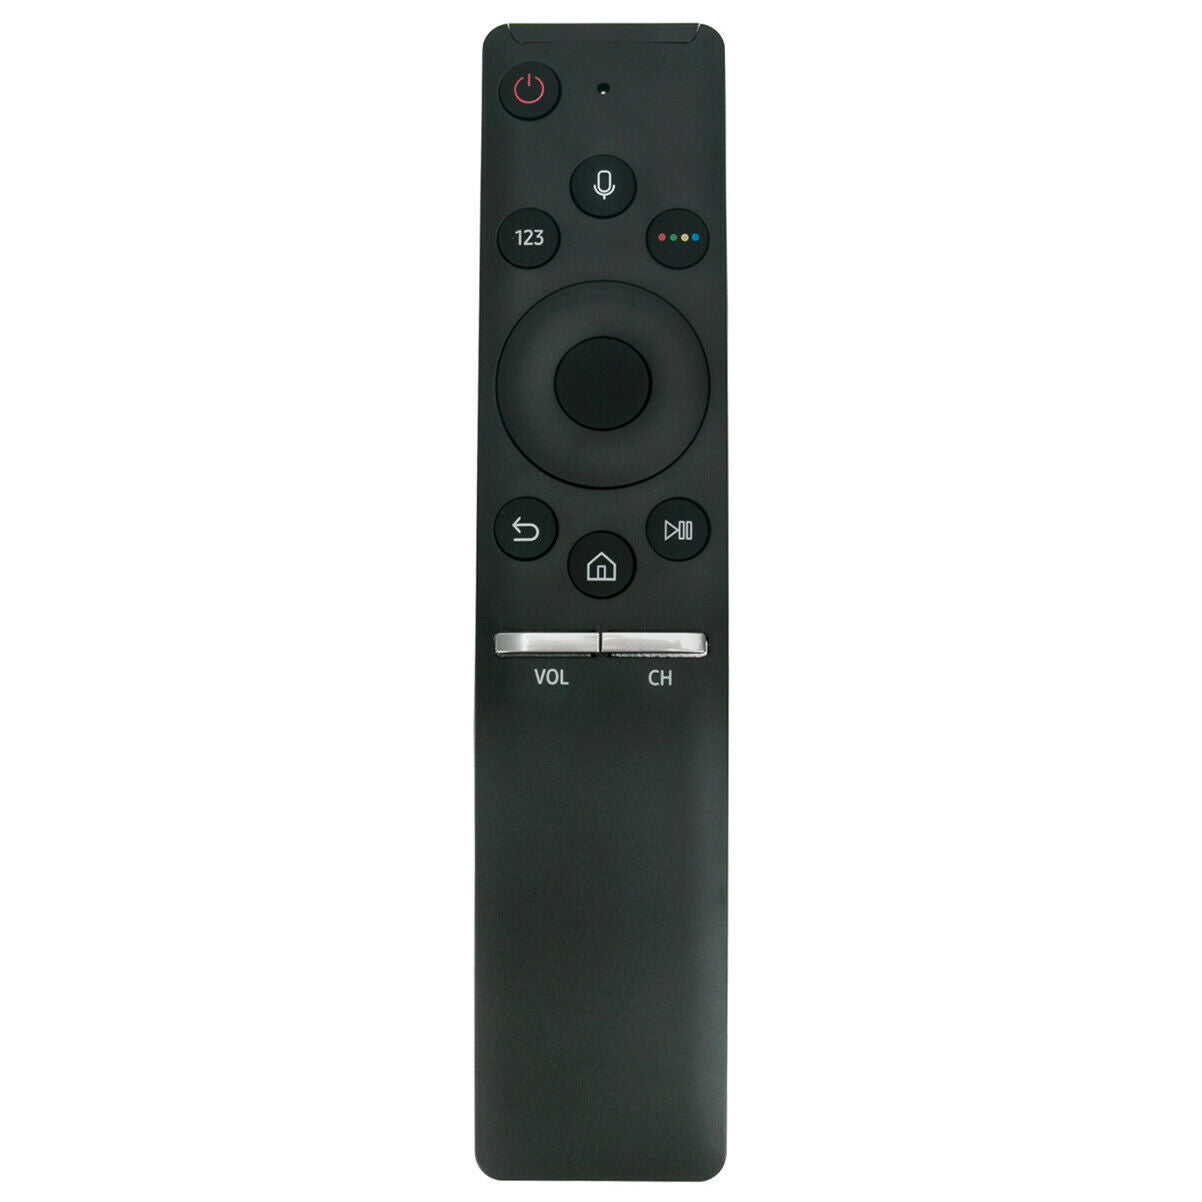 BN59-01298C Replacement Remote With Voice for Samsung Televisions BN59-01298D BN59-01298A